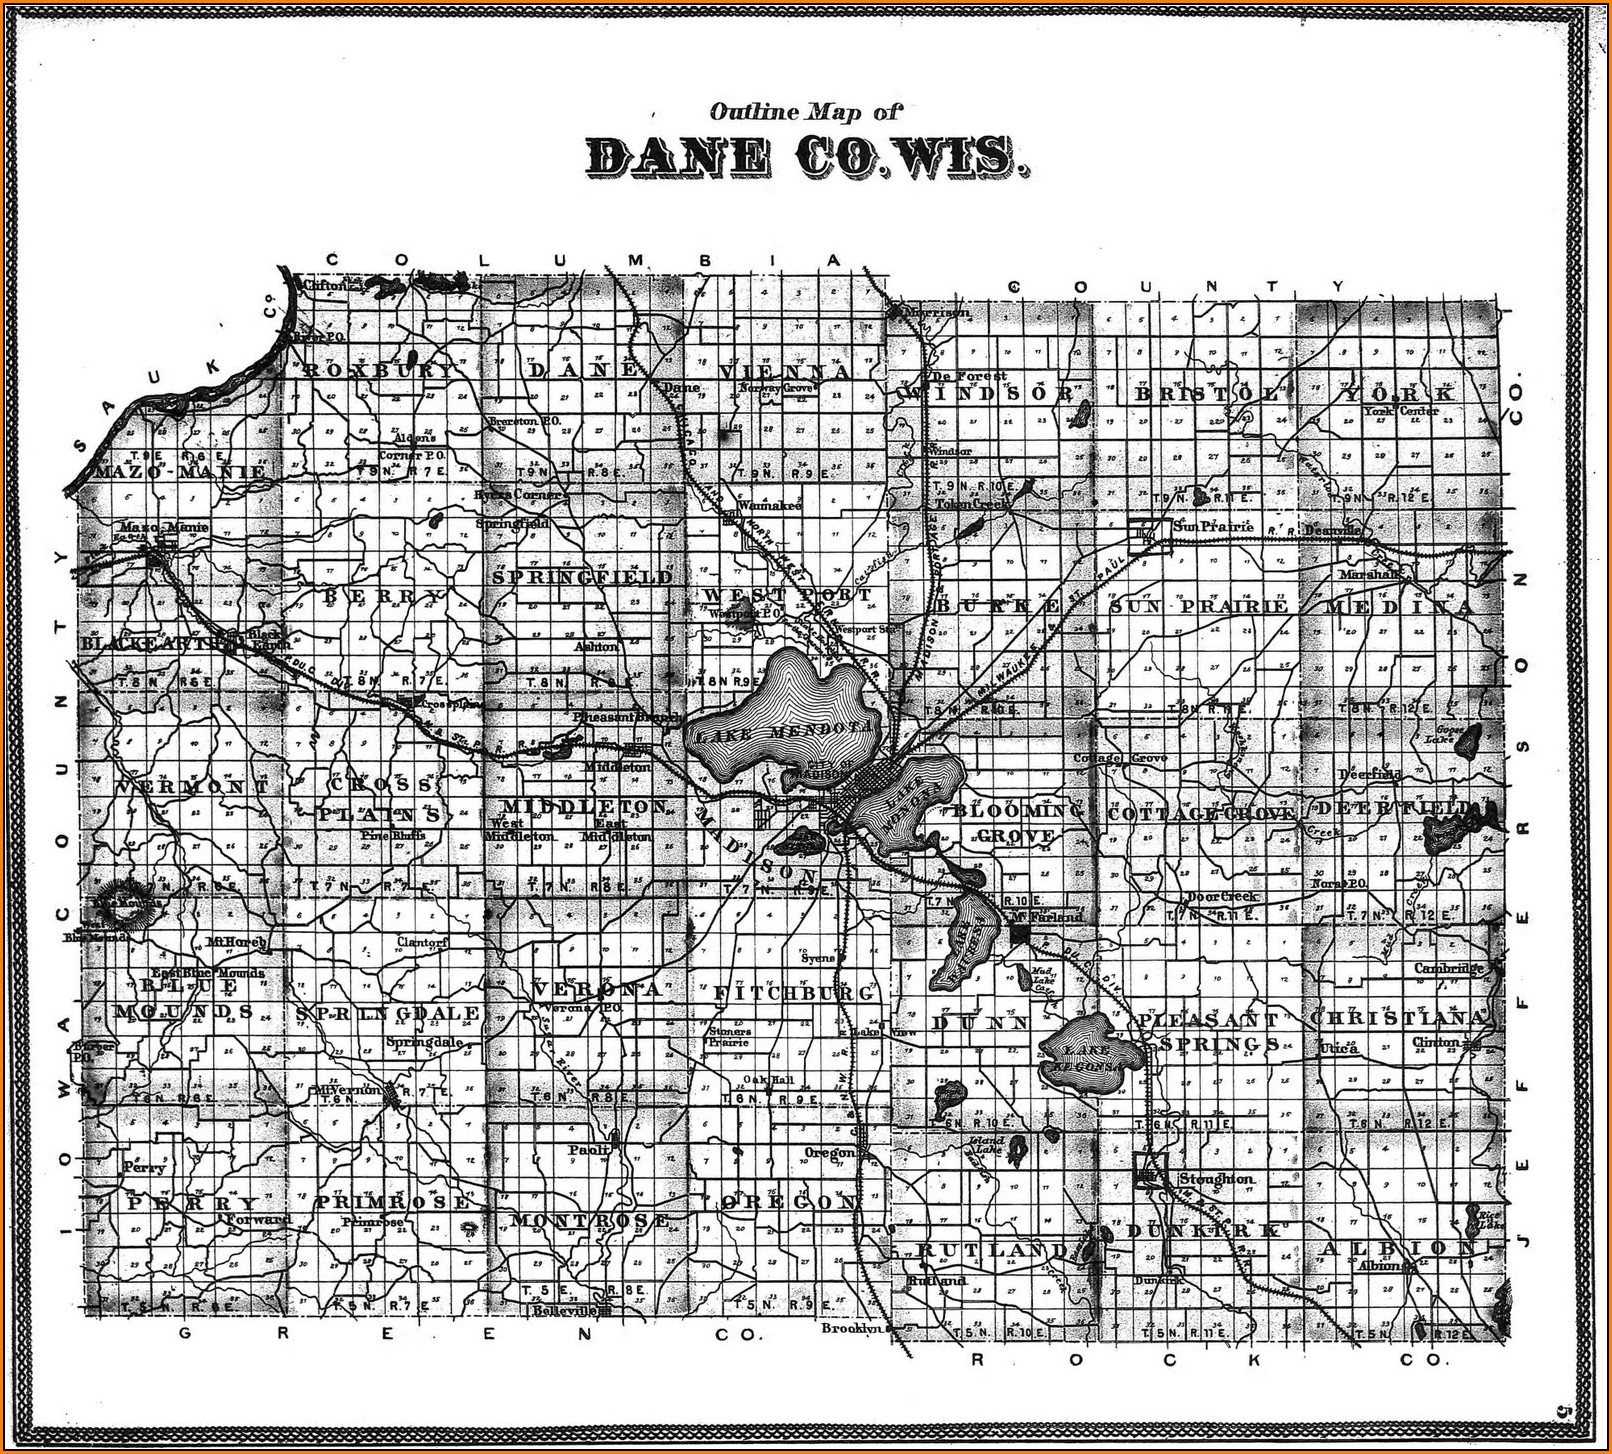 Map Of Dane County Townships